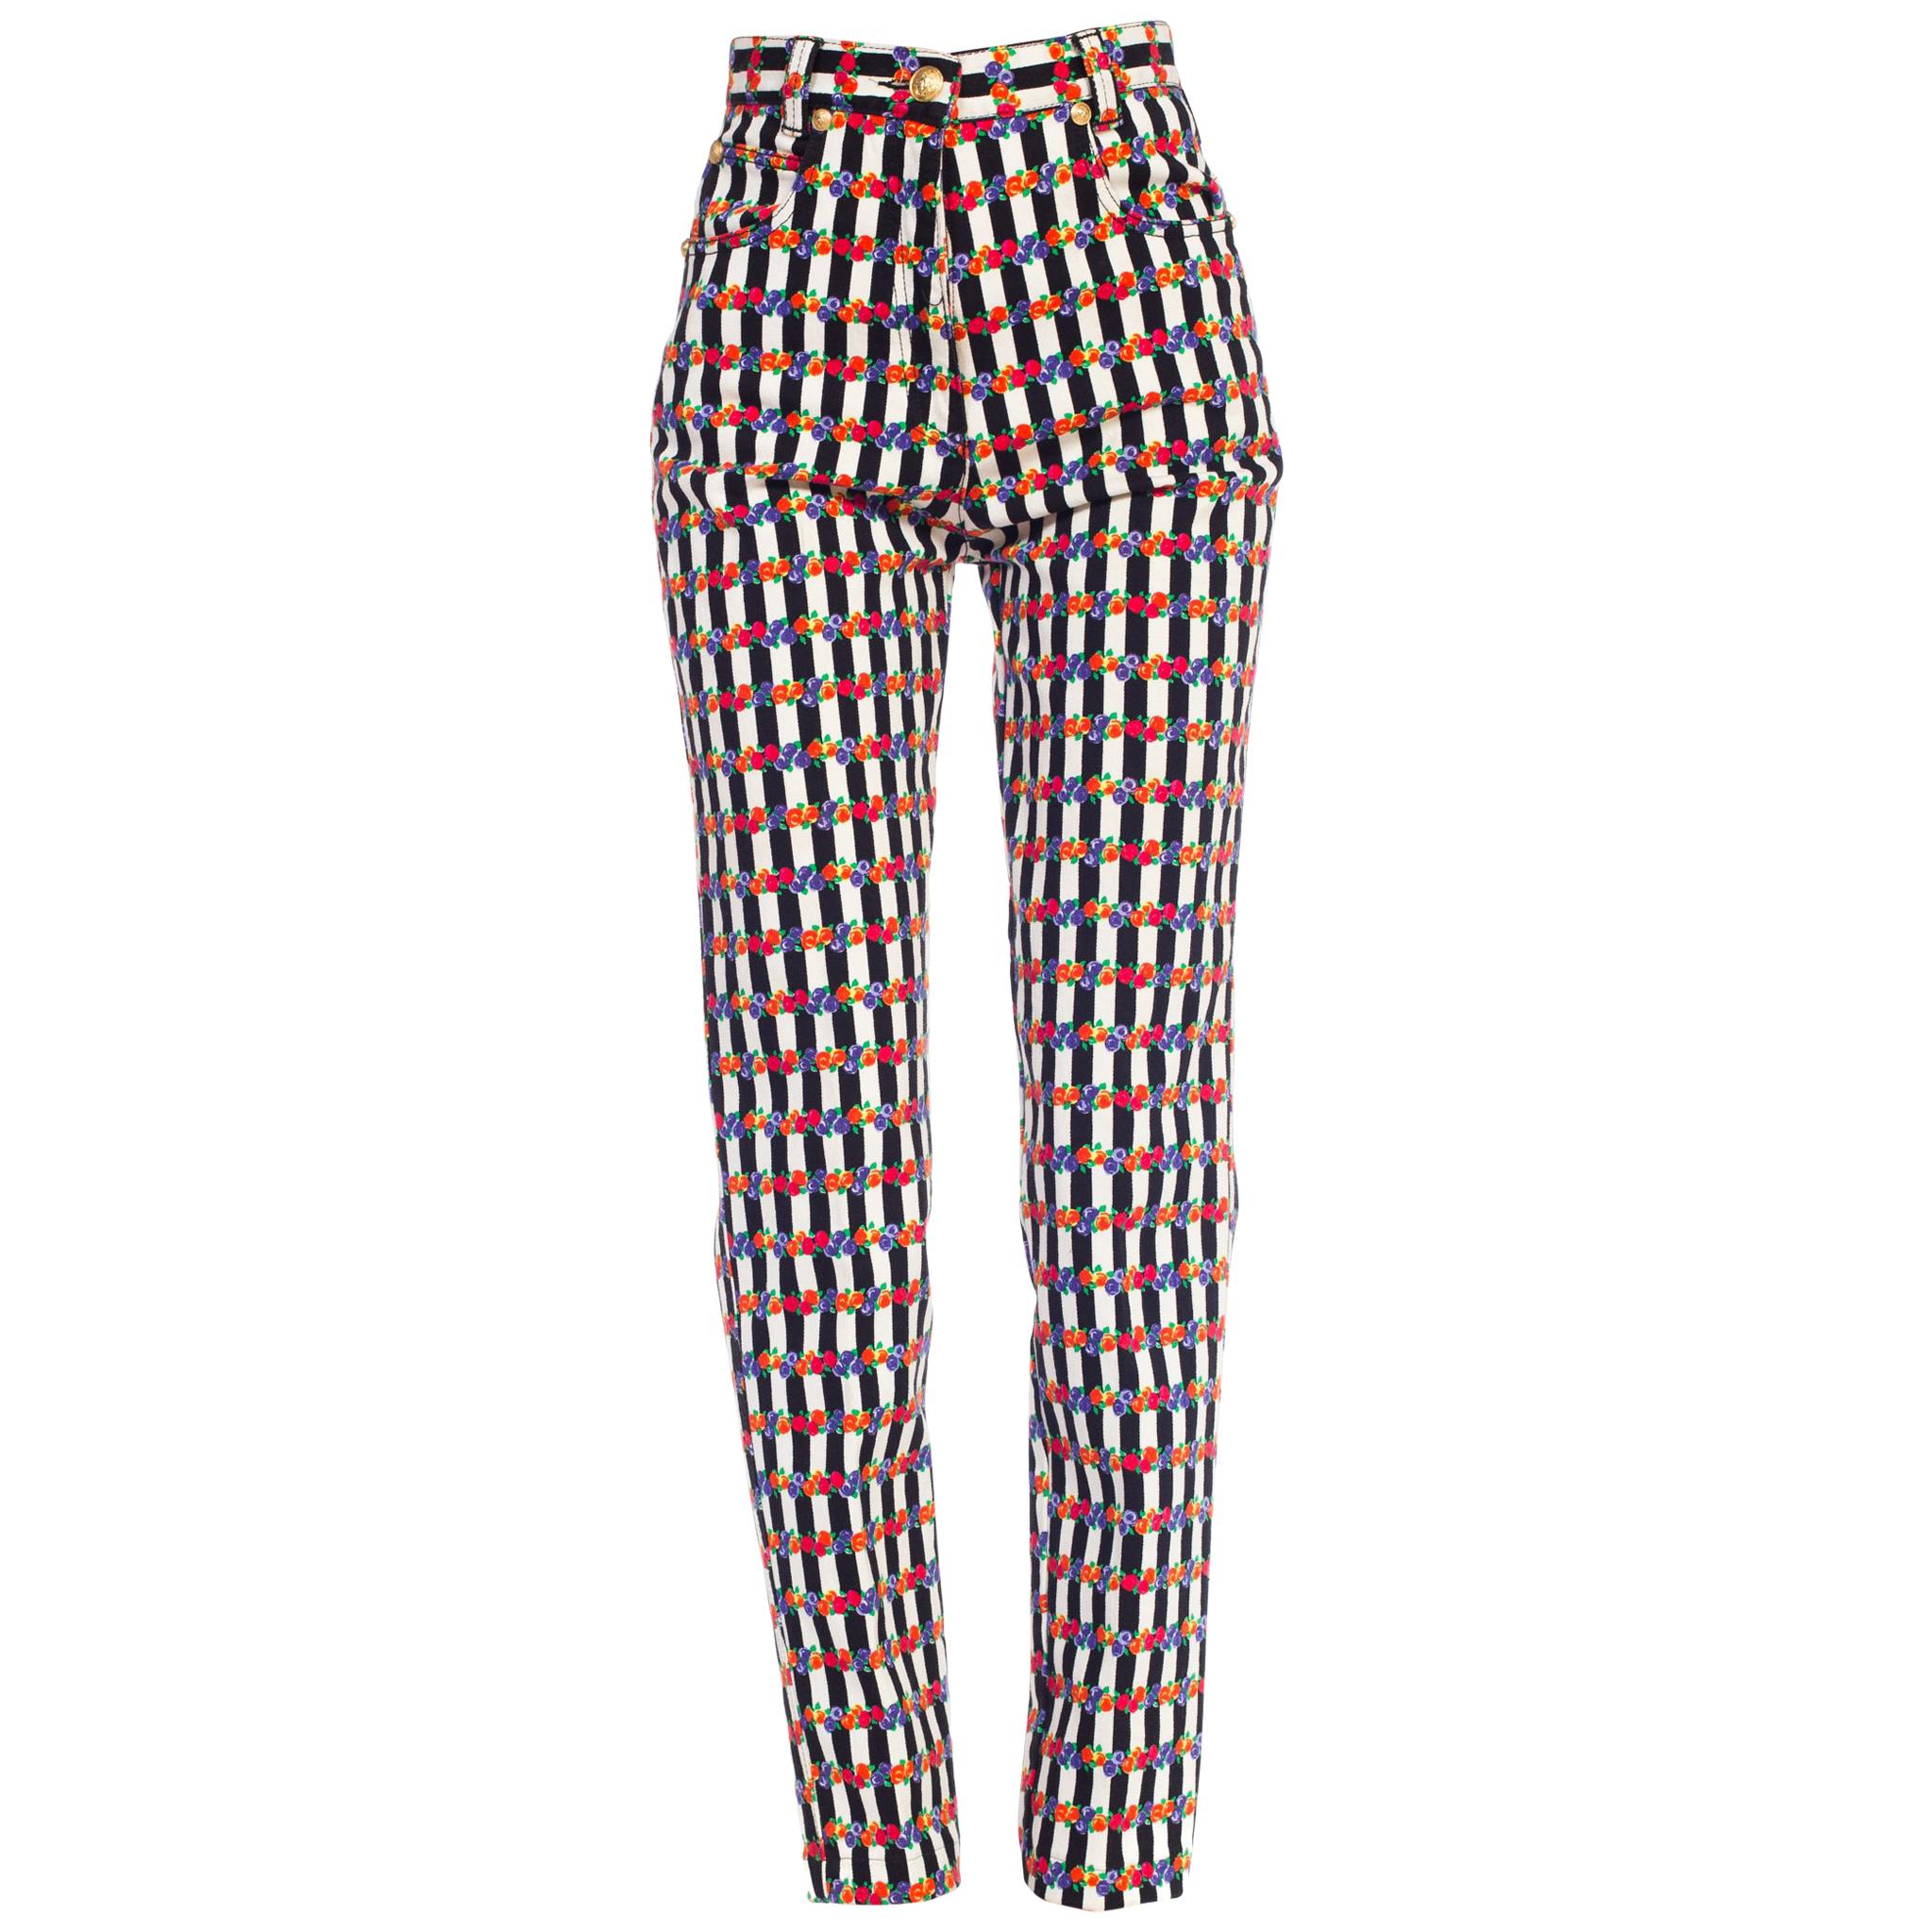 1990S GIANNI VERSACE  Floral Striped Jeans Pants